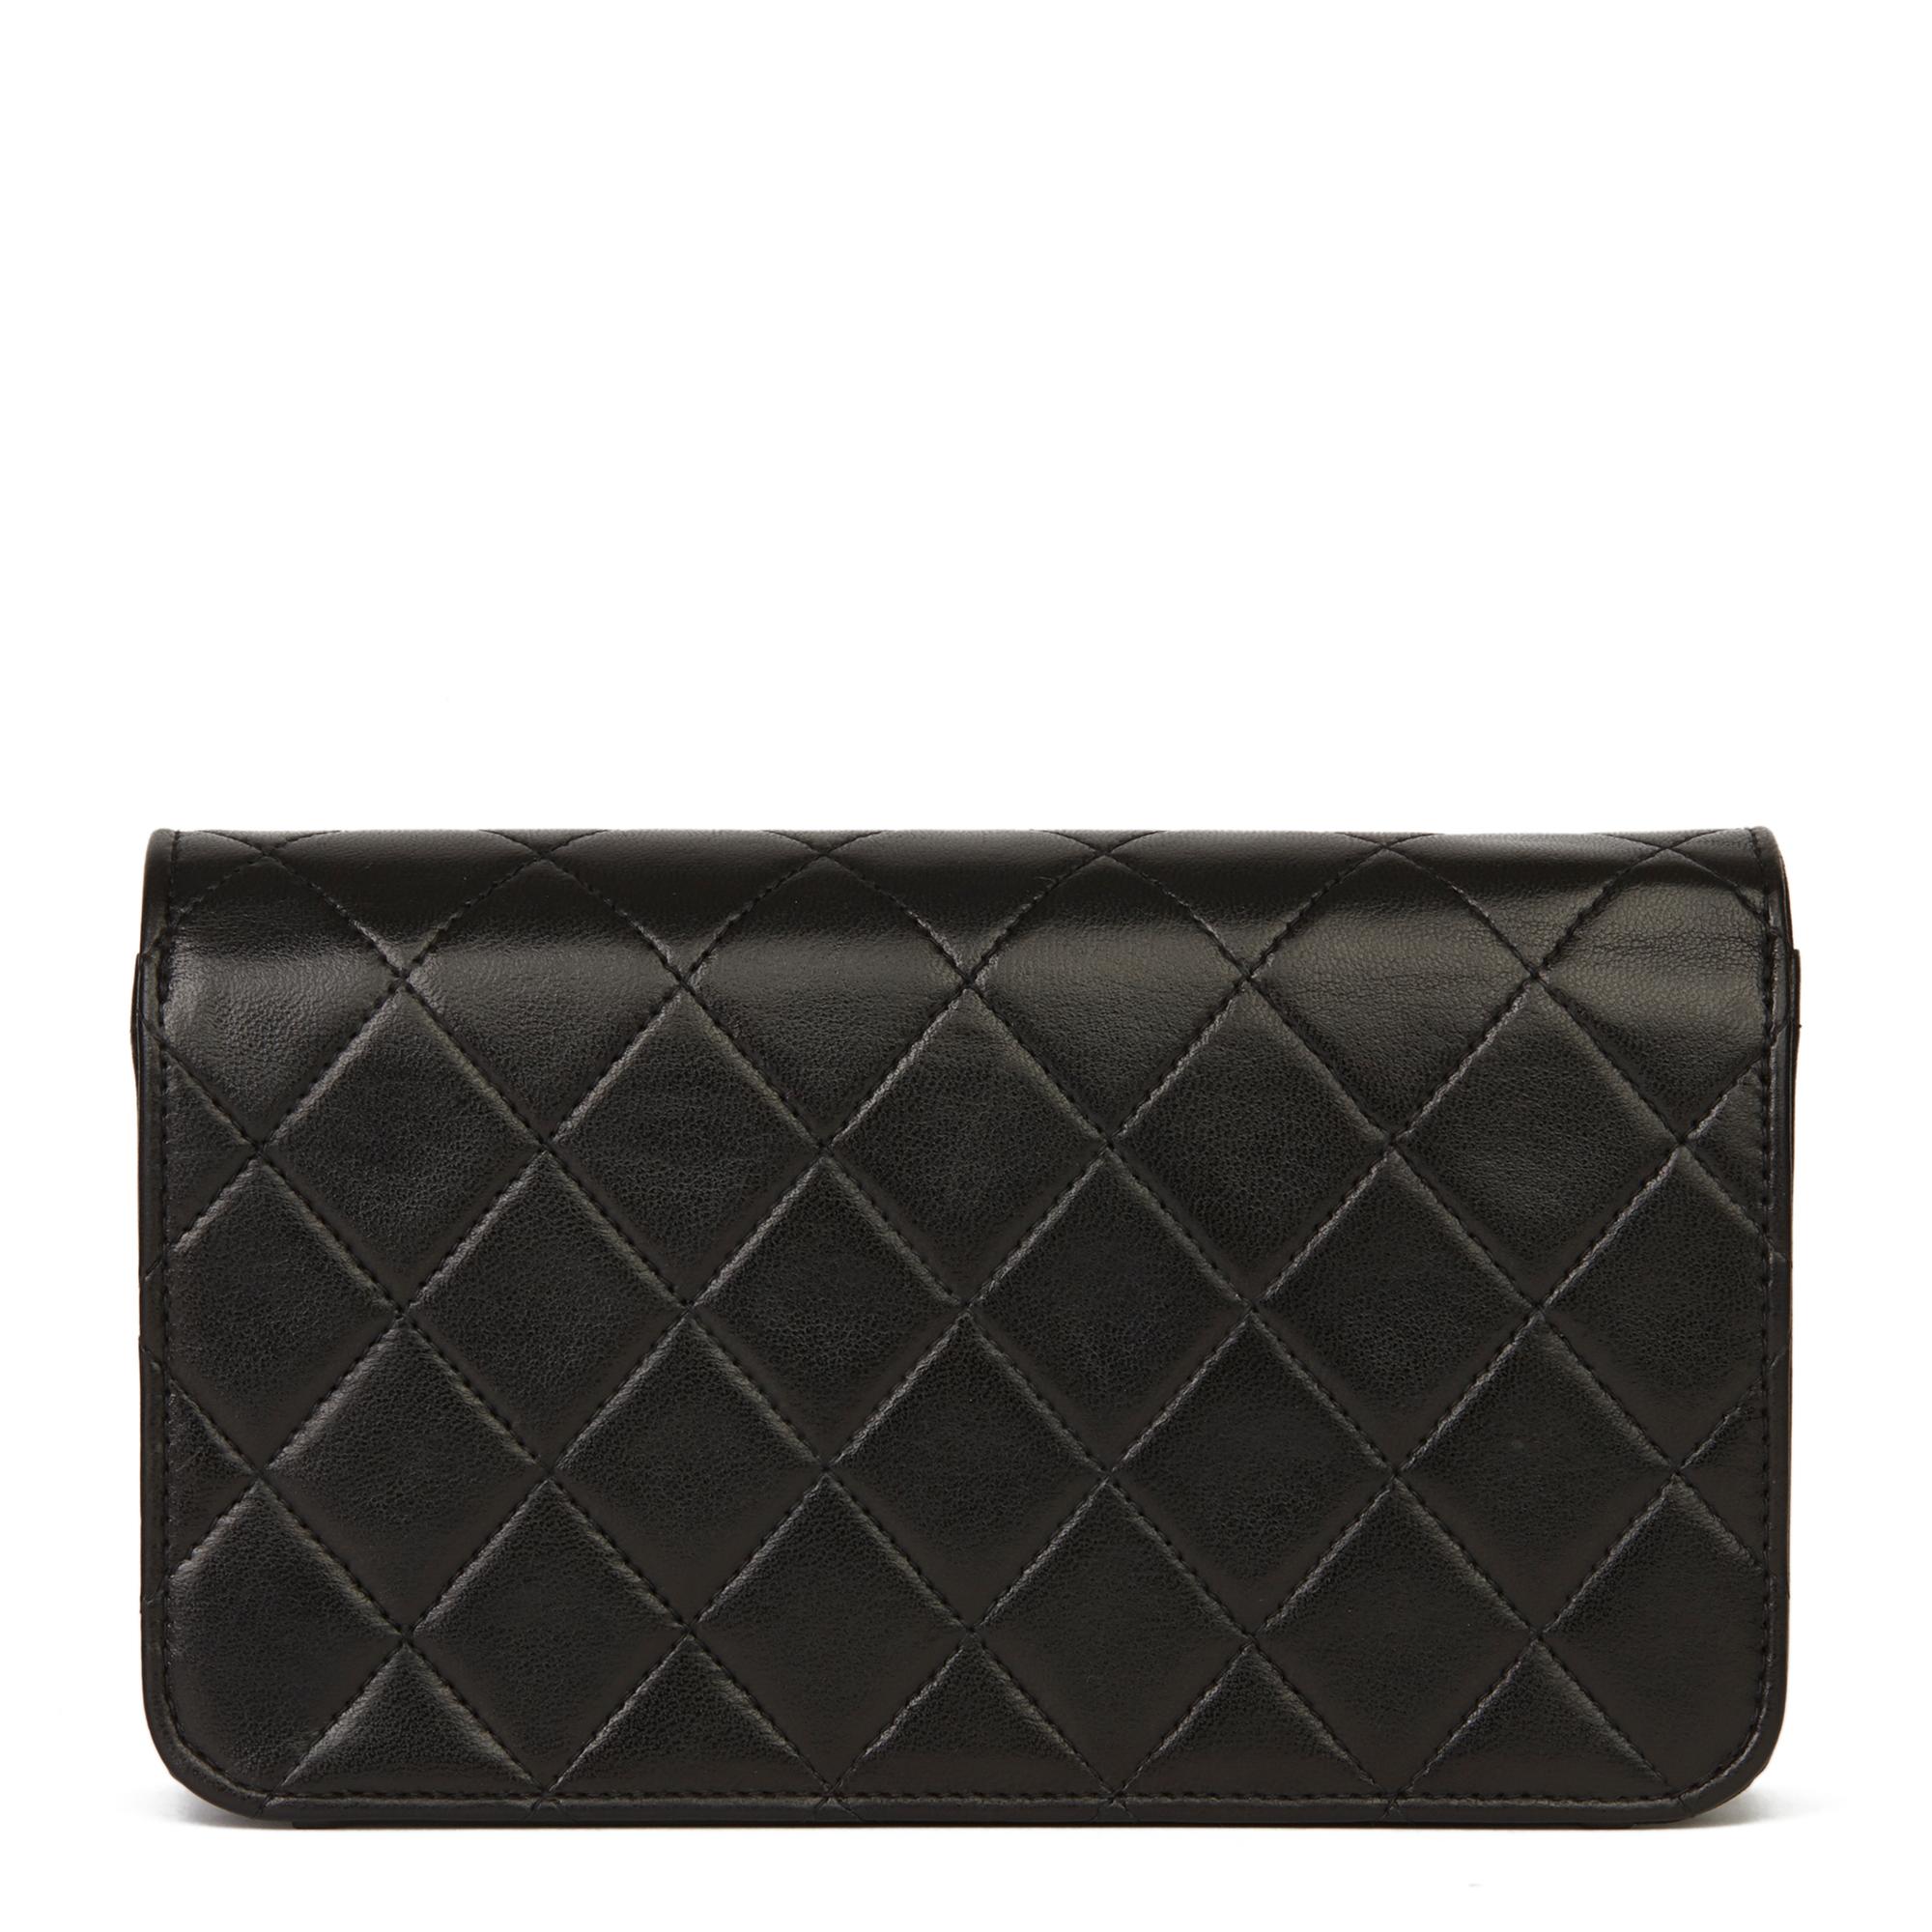 Women's 1994 Chanel Black Quilted Lambskin Vintage Mini Flap Bag